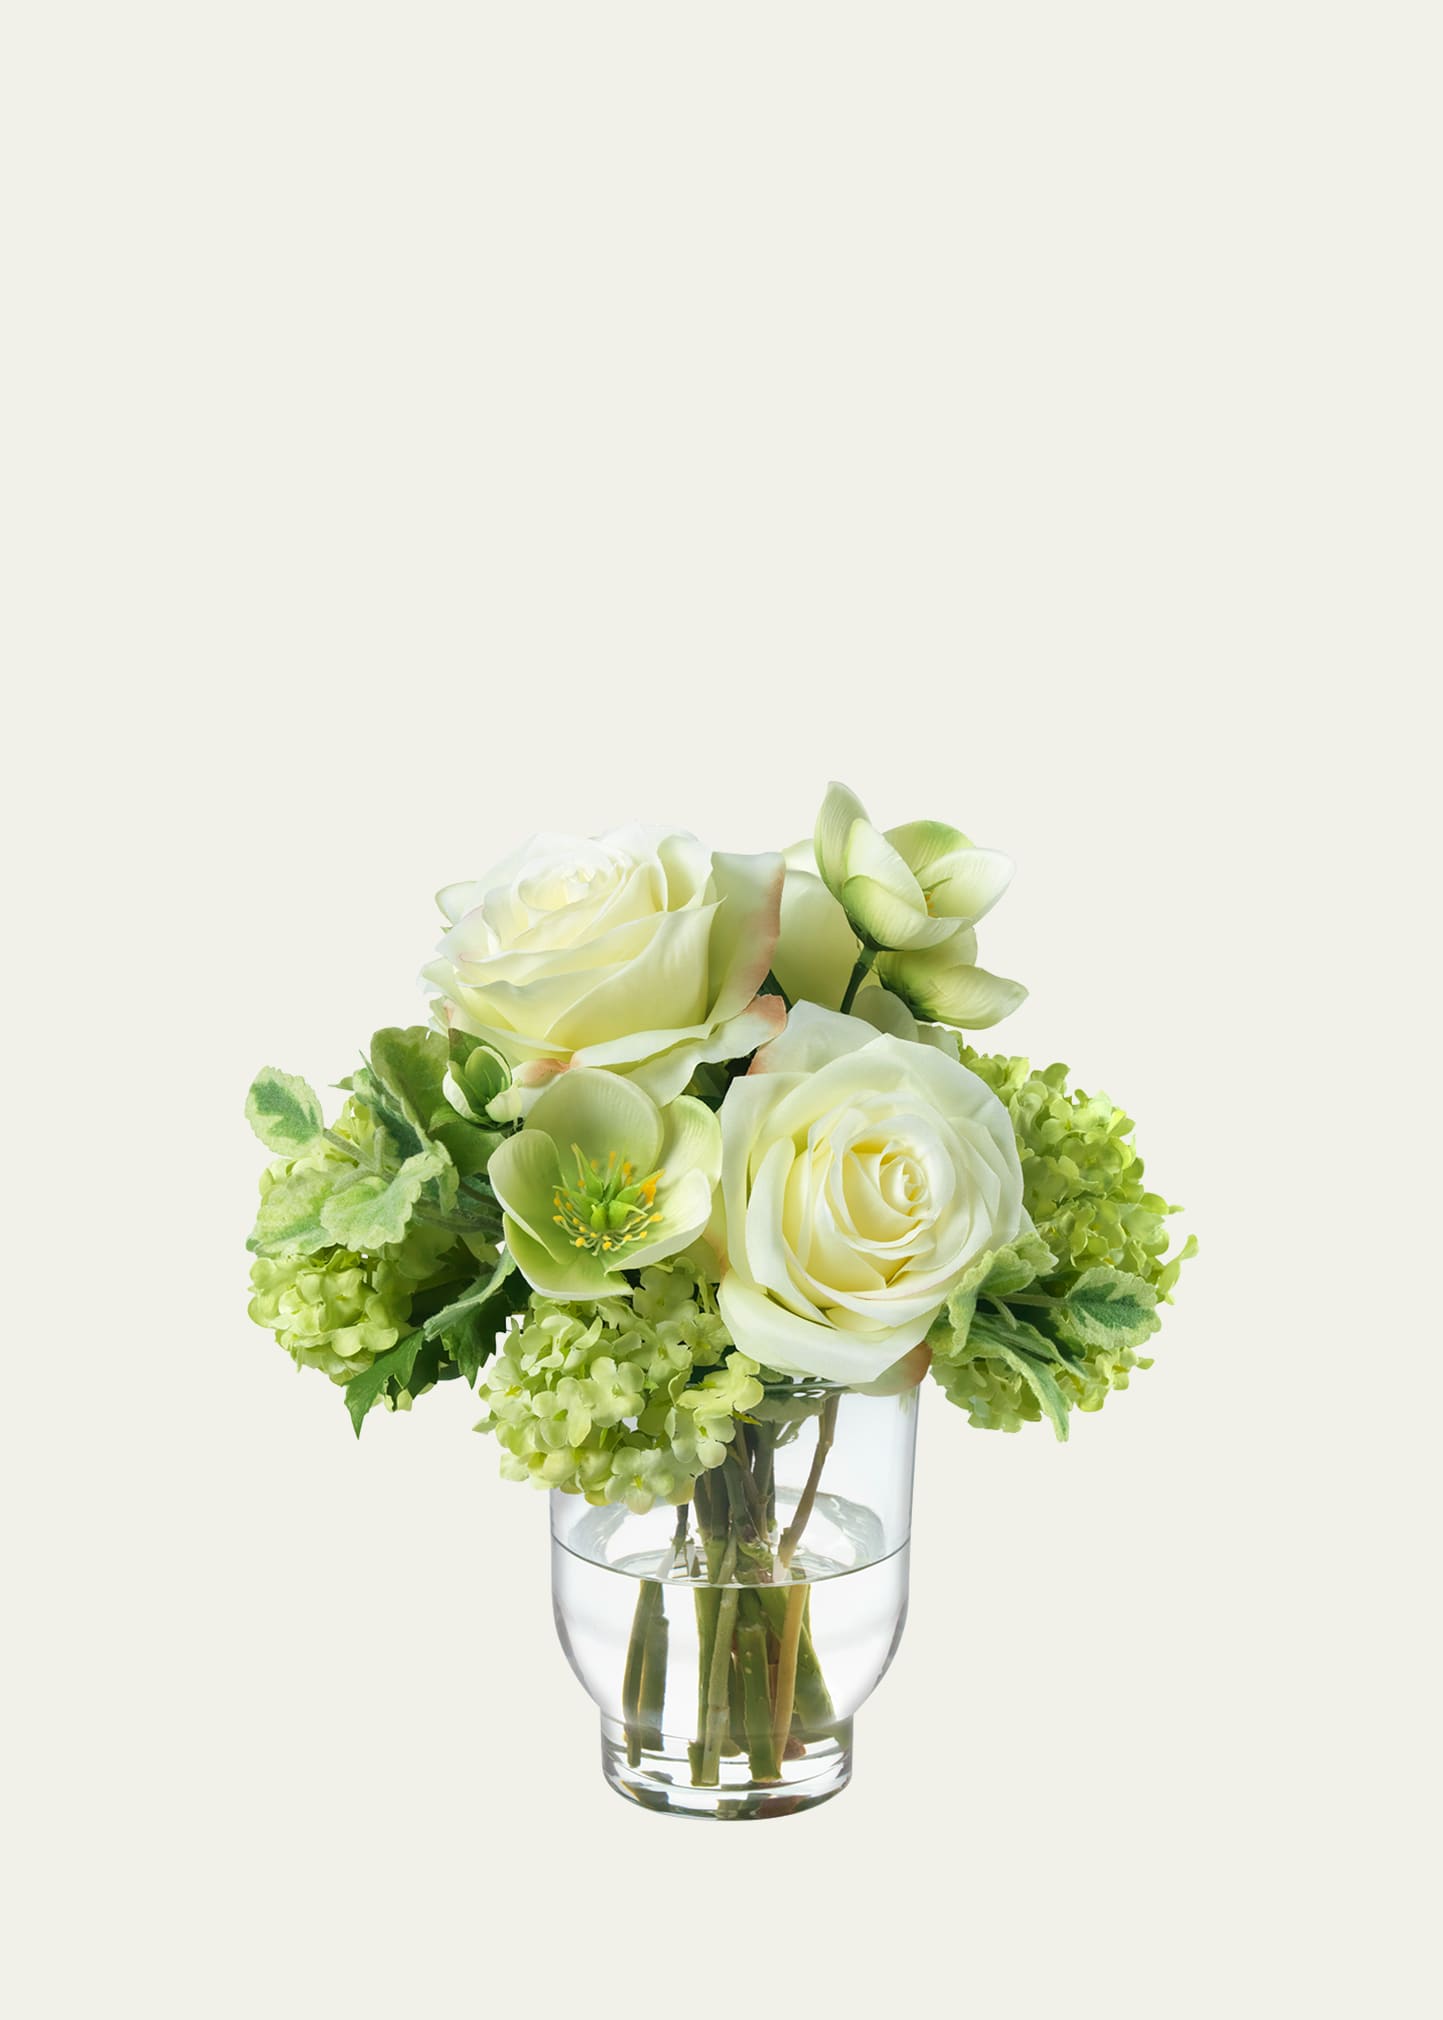 Diane James Hellebores, Roses, And Snowball 10" Faux Floral Arrangement In Glass Vase